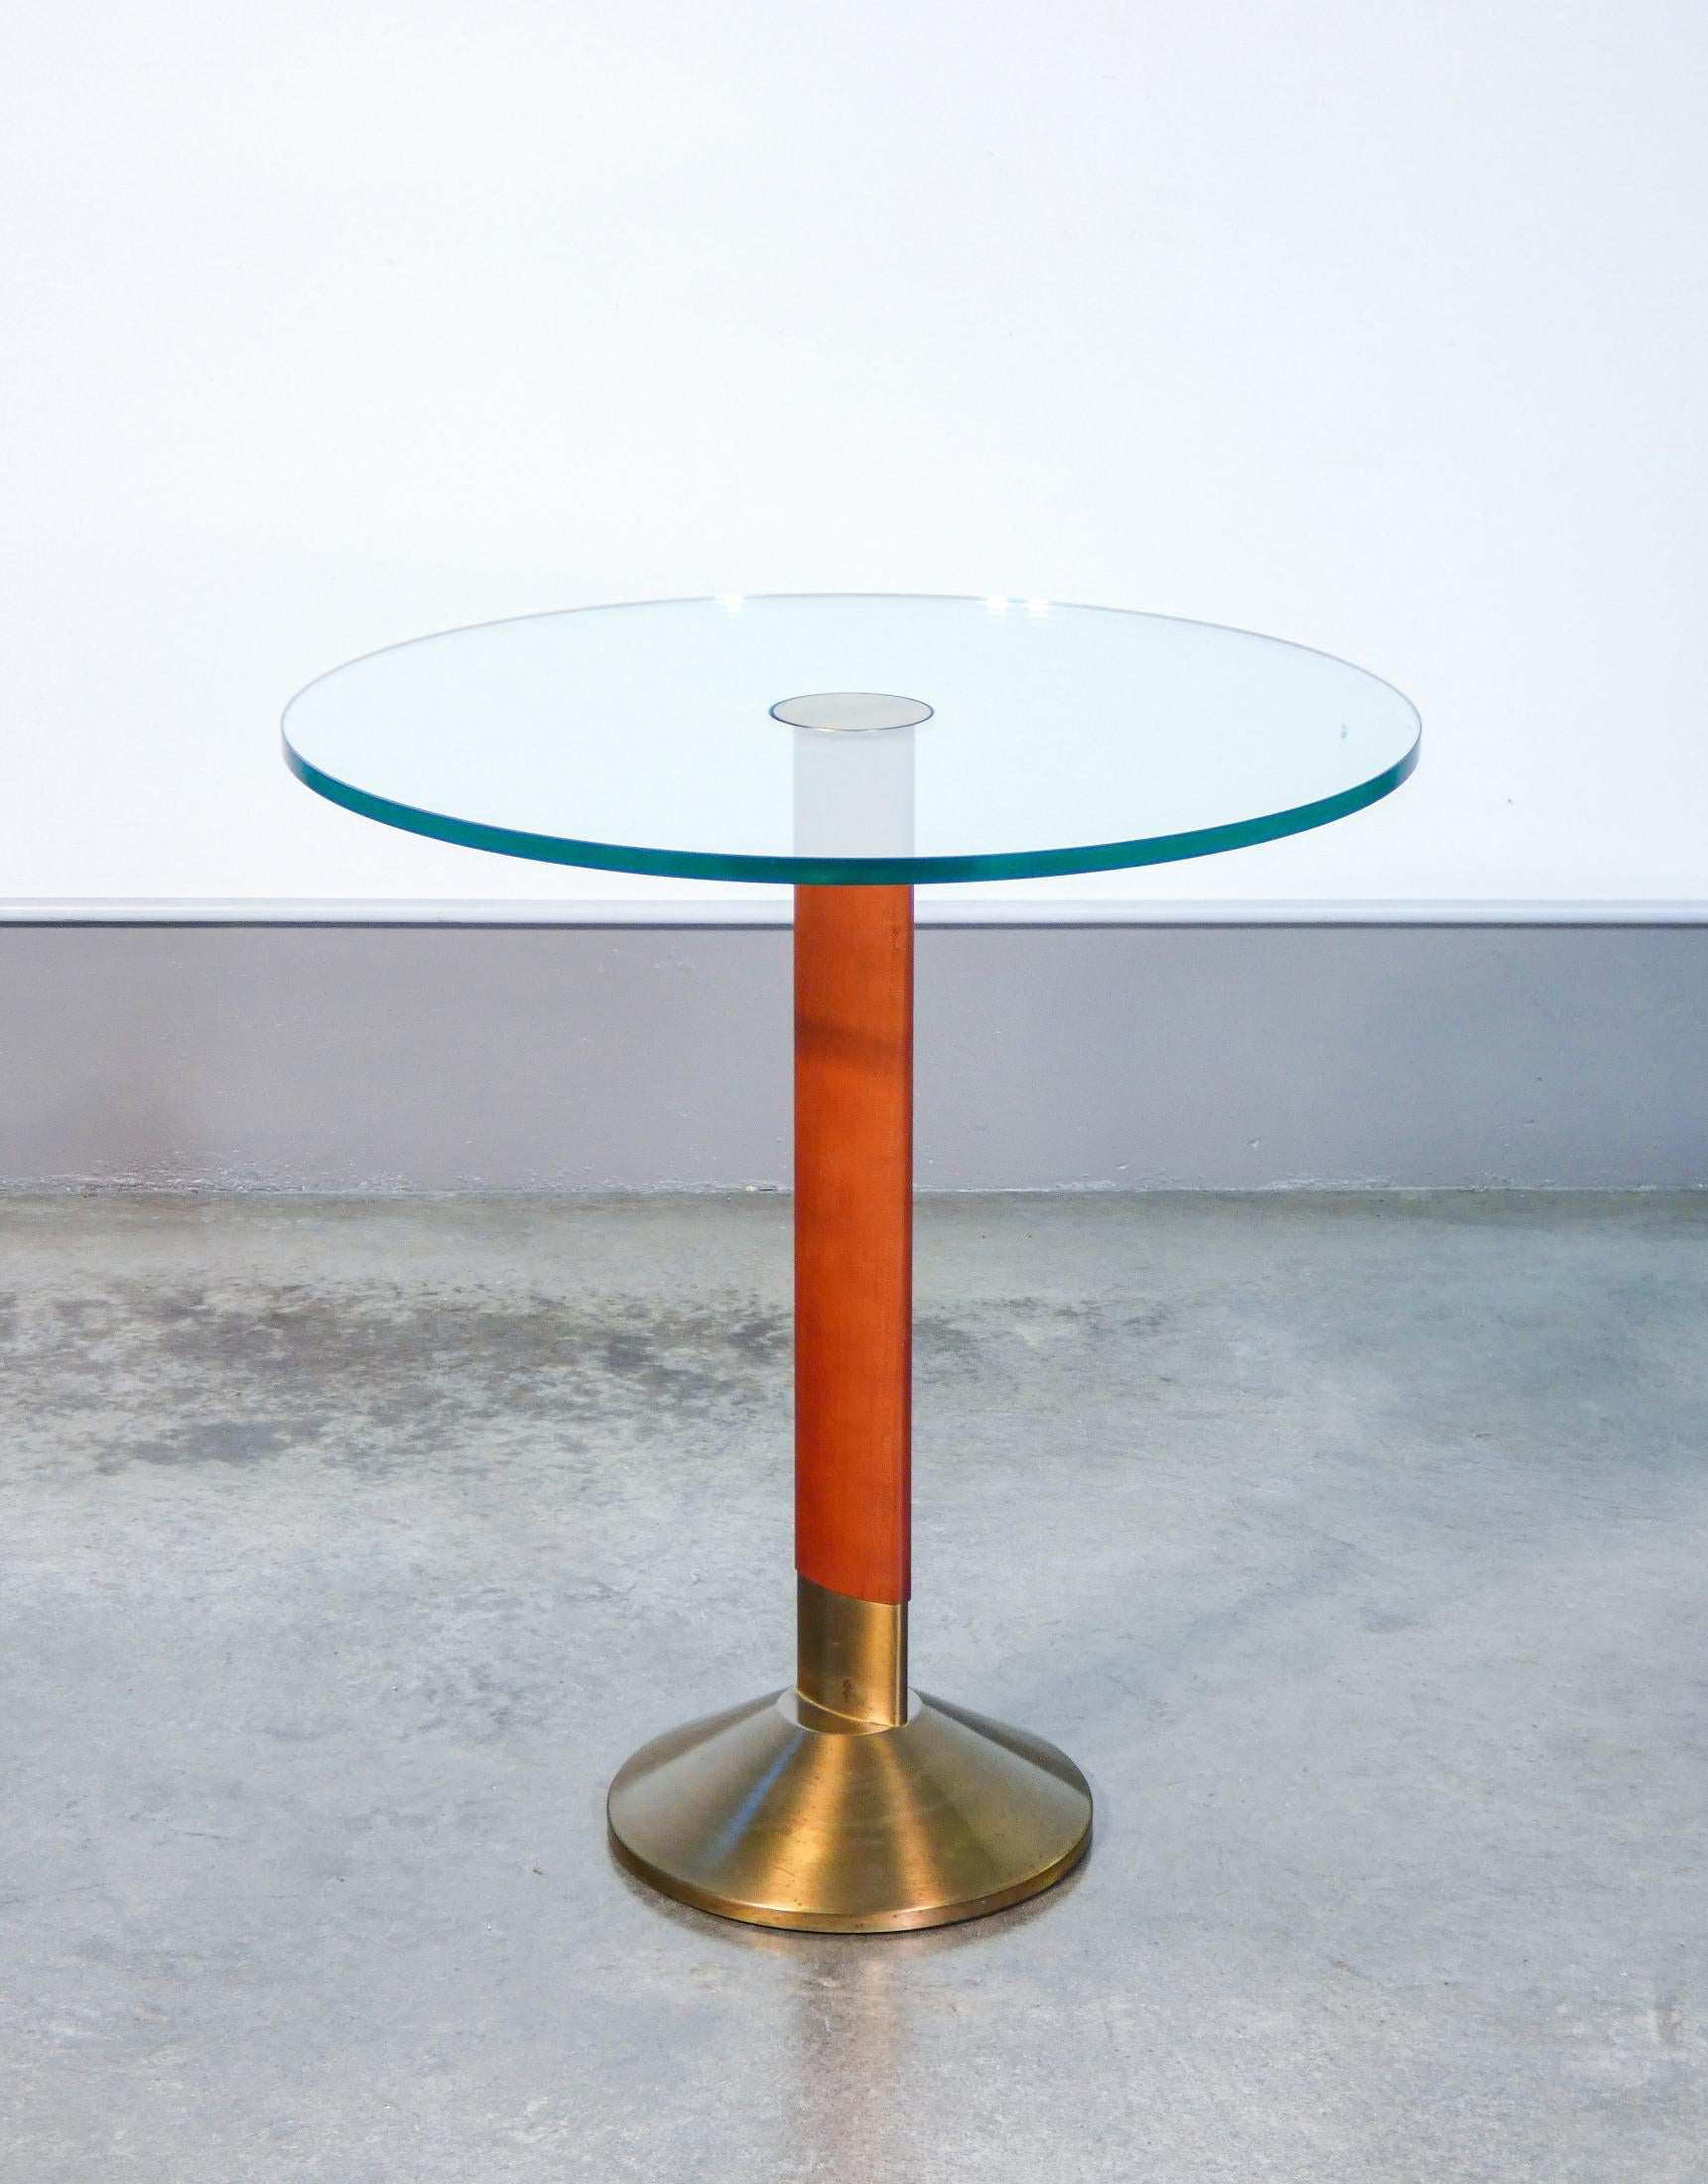 Coffee table with round top
design Daniela PUPPA
for FONTANA ARTE

ORIGIN
Italy

PERIOD
1980s

DESIGNER
Daniela Puppa
A multifaceted architect and designer, he has made style and elegance his distinctive trait. Watchwords: energy and